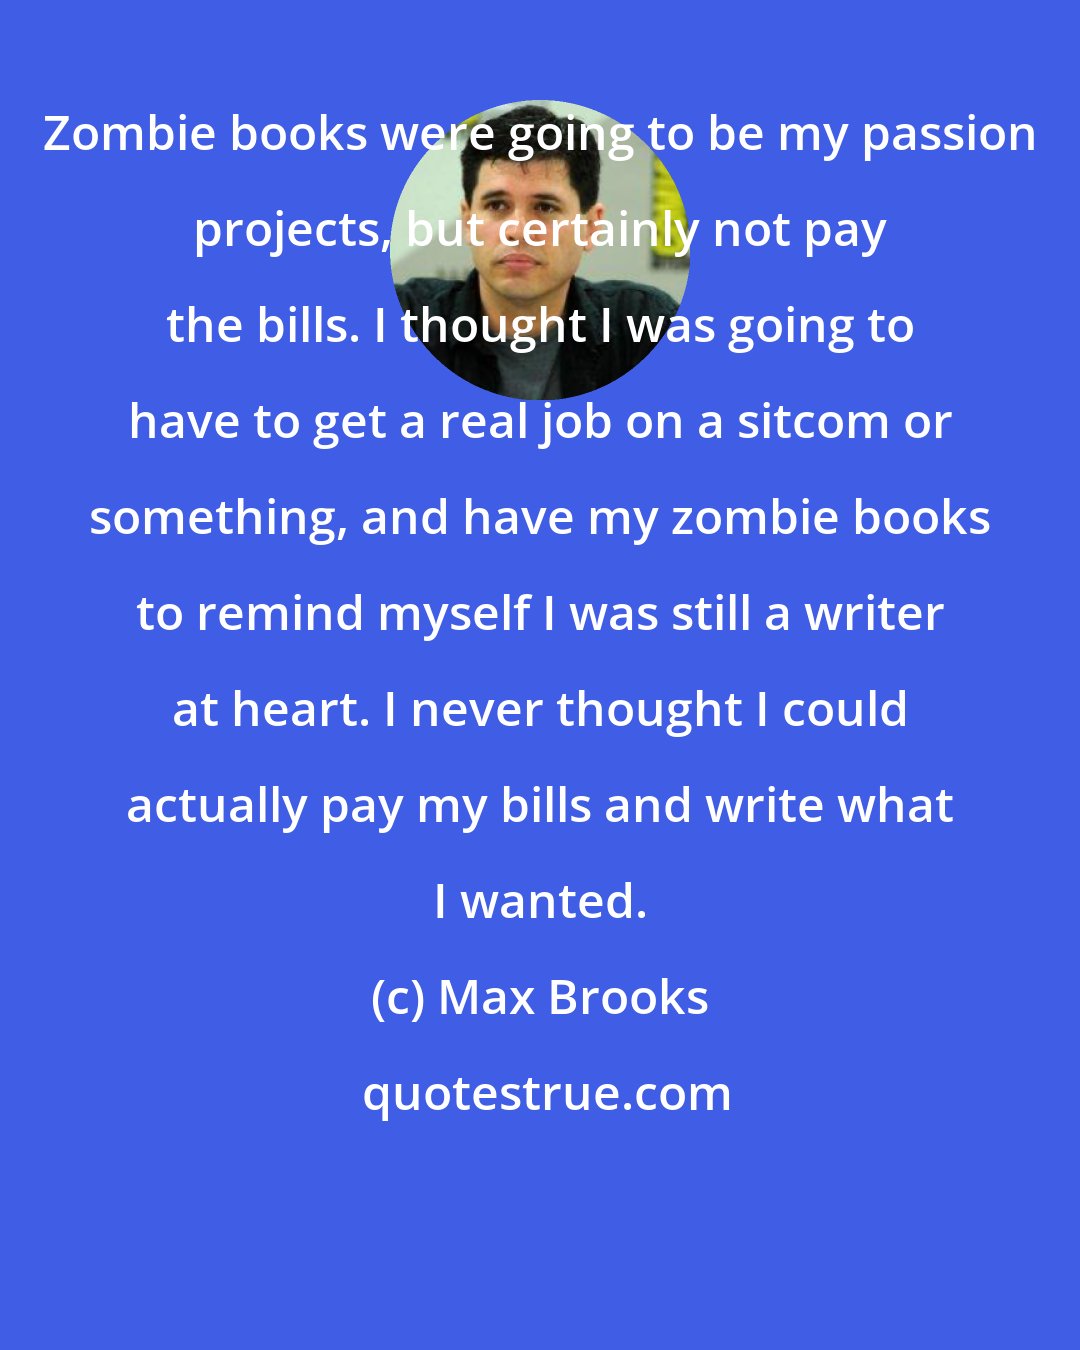 Max Brooks: Zombie books were going to be my passion projects, but certainly not pay the bills. I thought I was going to have to get a real job on a sitcom or something, and have my zombie books to remind myself I was still a writer at heart. I never thought I could actually pay my bills and write what I wanted.